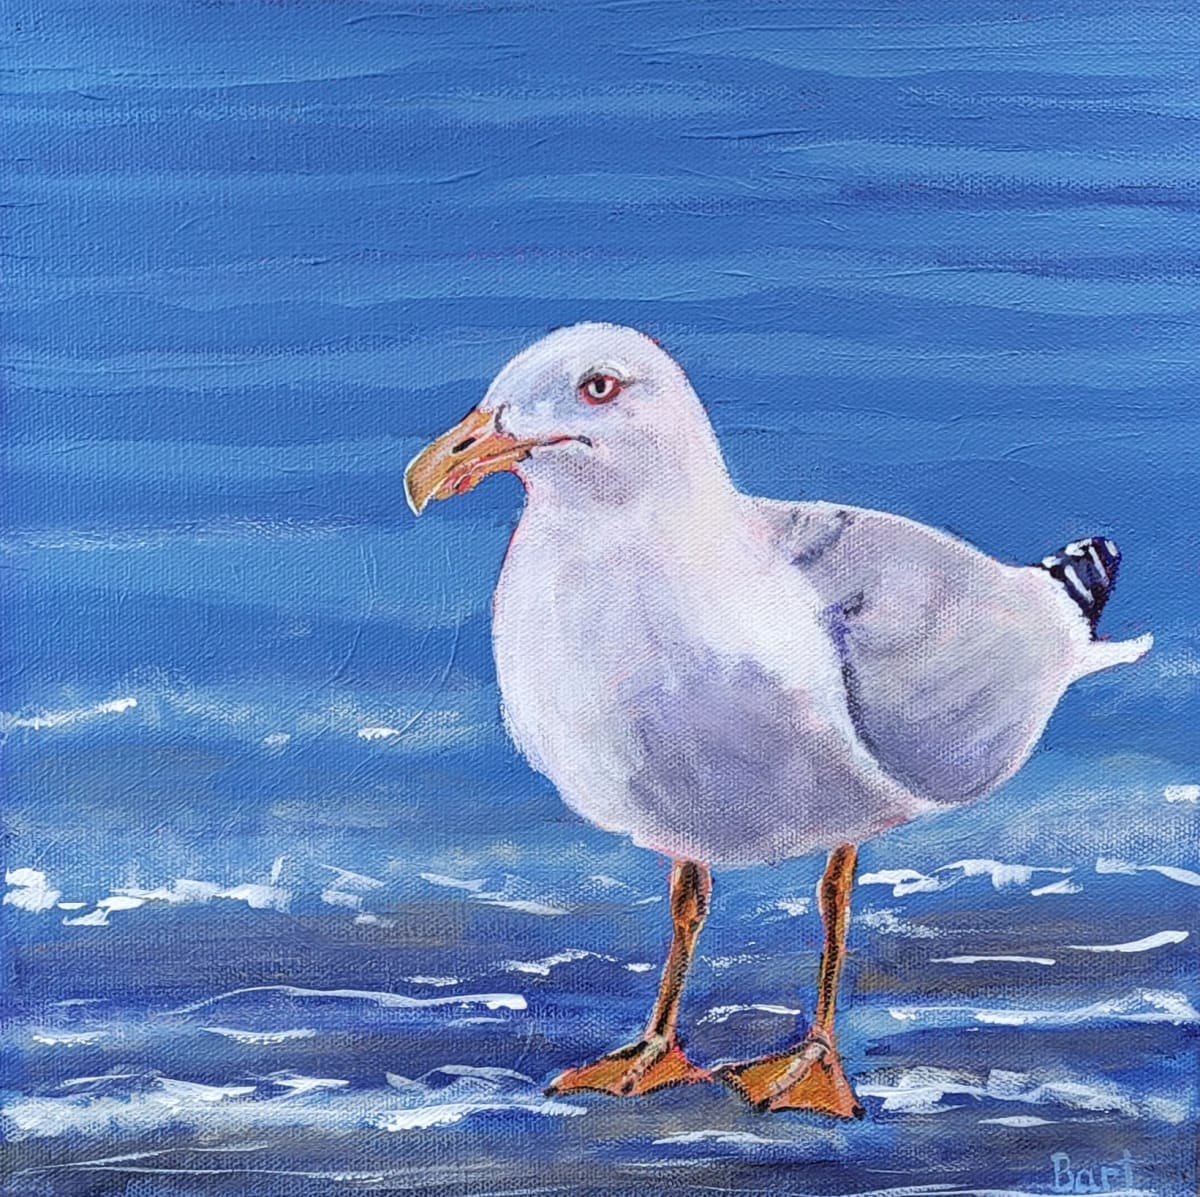 Seagull by Sylvie Bart  Image: Seagull